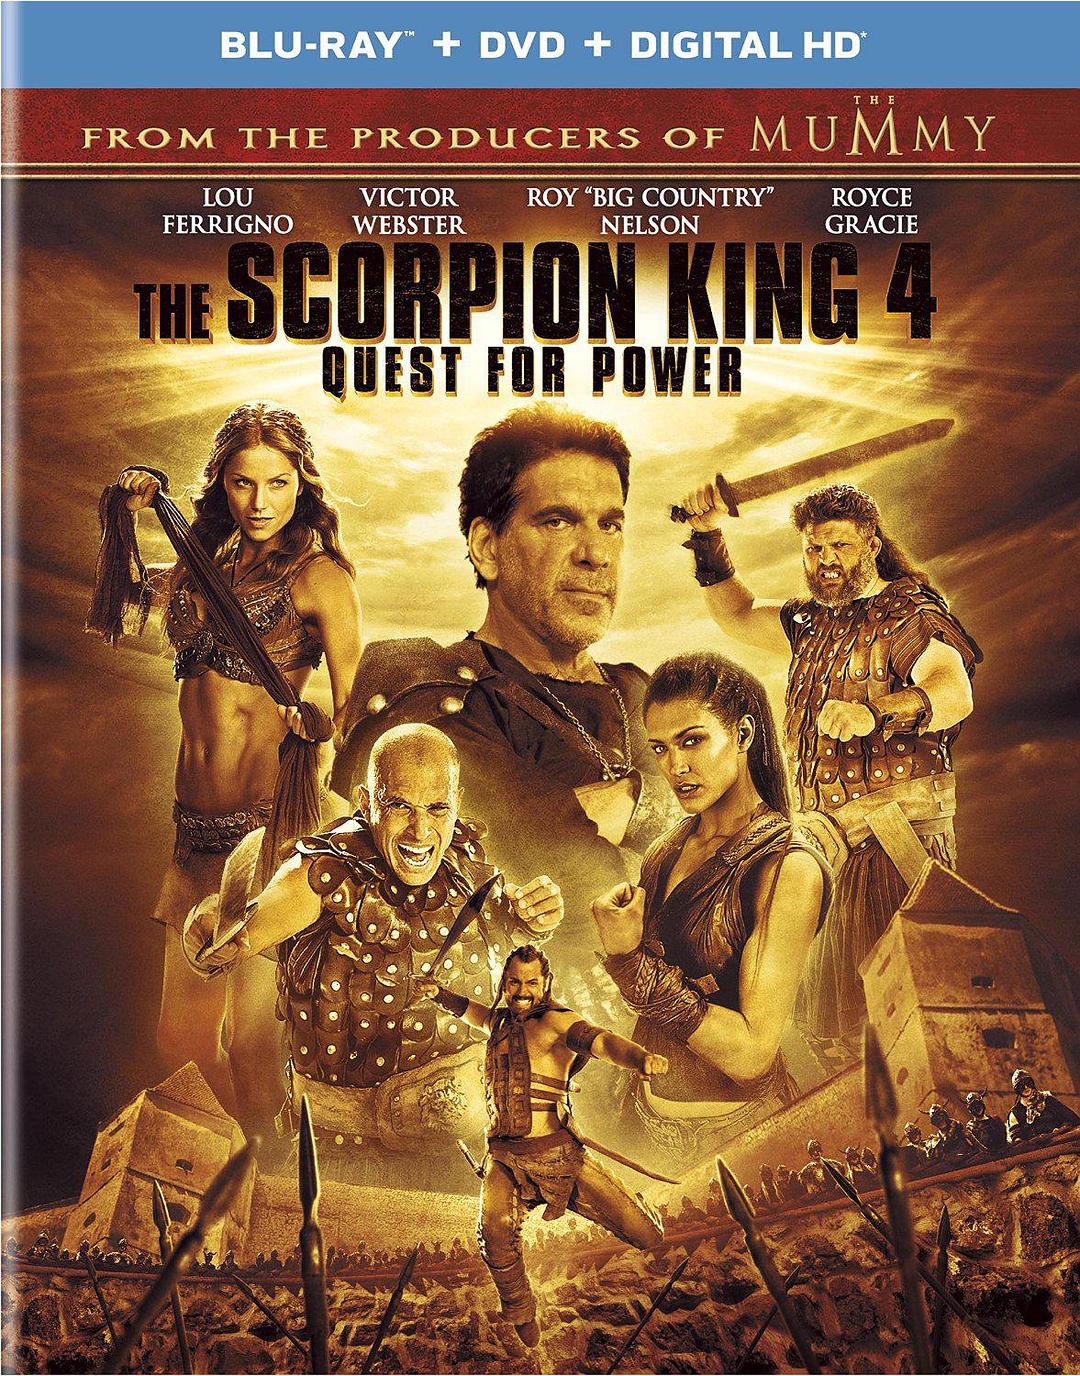 Ы4:Ȩ The.Scorpion.King.4.Quest.for.Power.2015.1080p.BluRay.x264-ROVERS 7.72-1.png